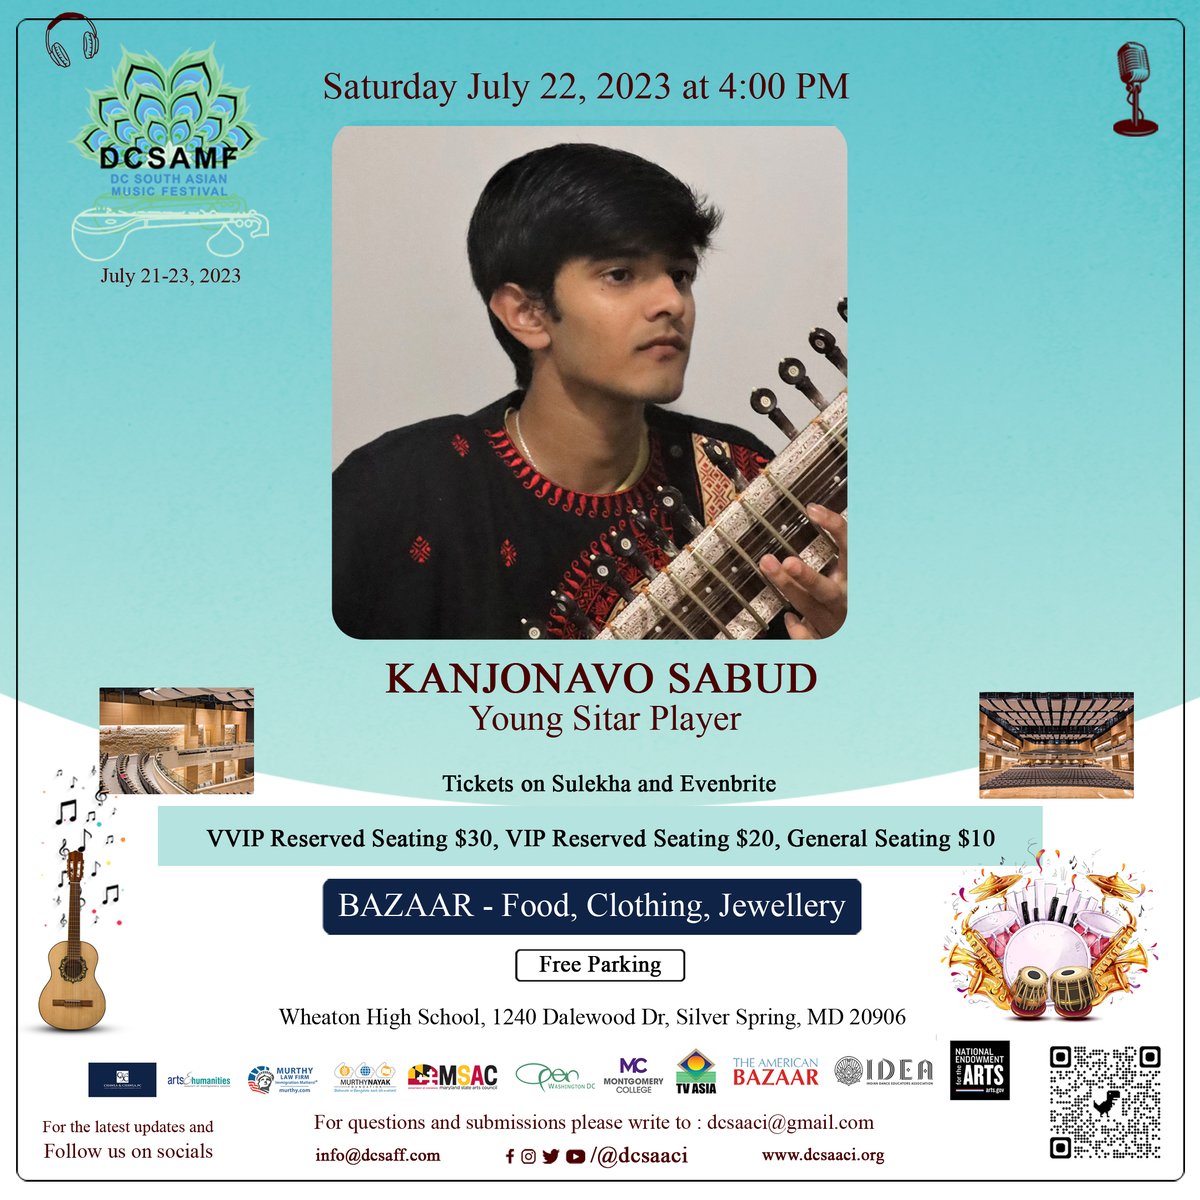 Come and support our young rising star in Sitar Kanjonavo Sabud! 

Watch this video of Kanjonavo's performance!
drive.google.com/file/d/1uLSBpi…

Tickets are still available; visit: dcsaaci.org to buy them!
Use discuount code: DCSAMF4JULY20

#dcevents #thingstododc